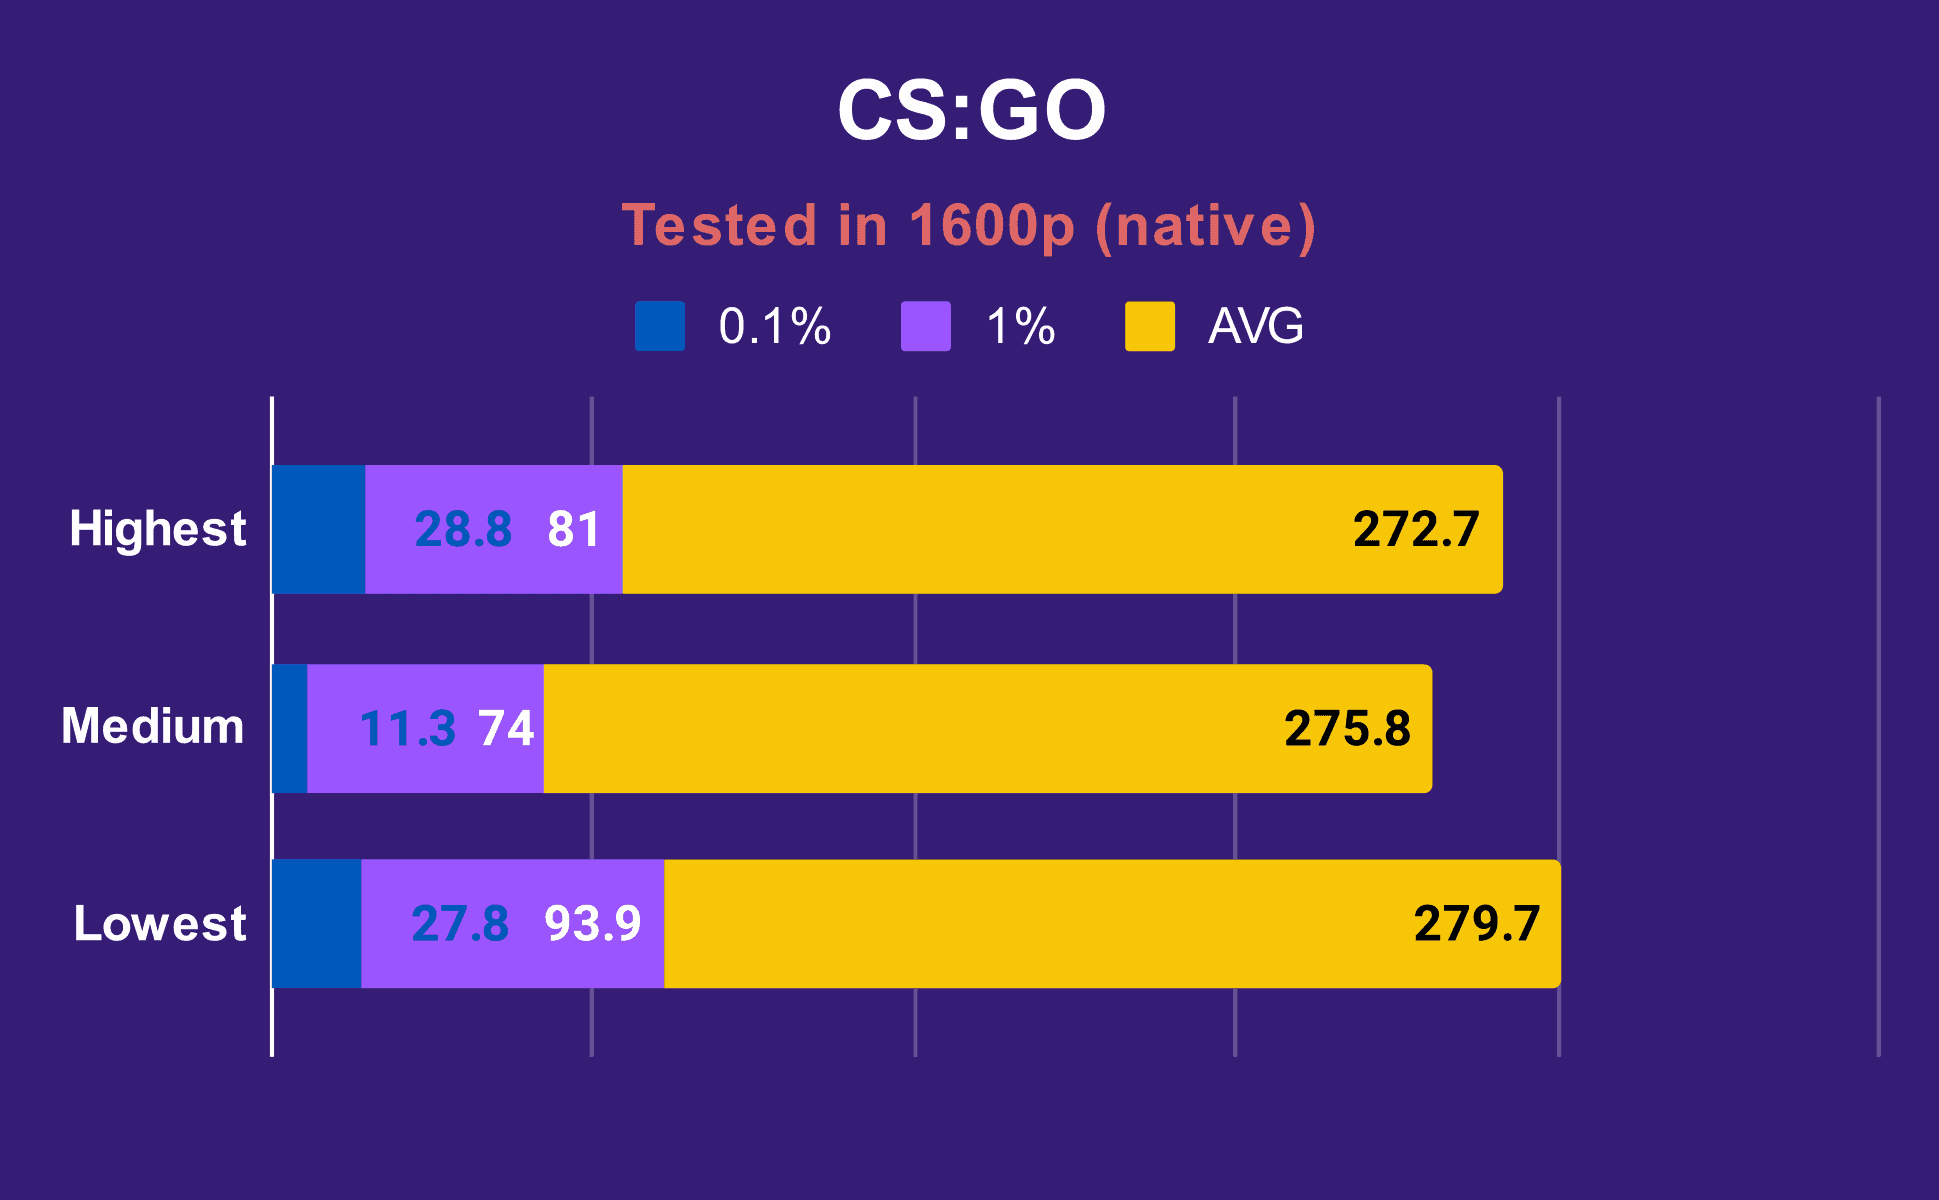 ASUS ROG FLOW X16 BENCHMARK CSGO TESTED IN 1600P